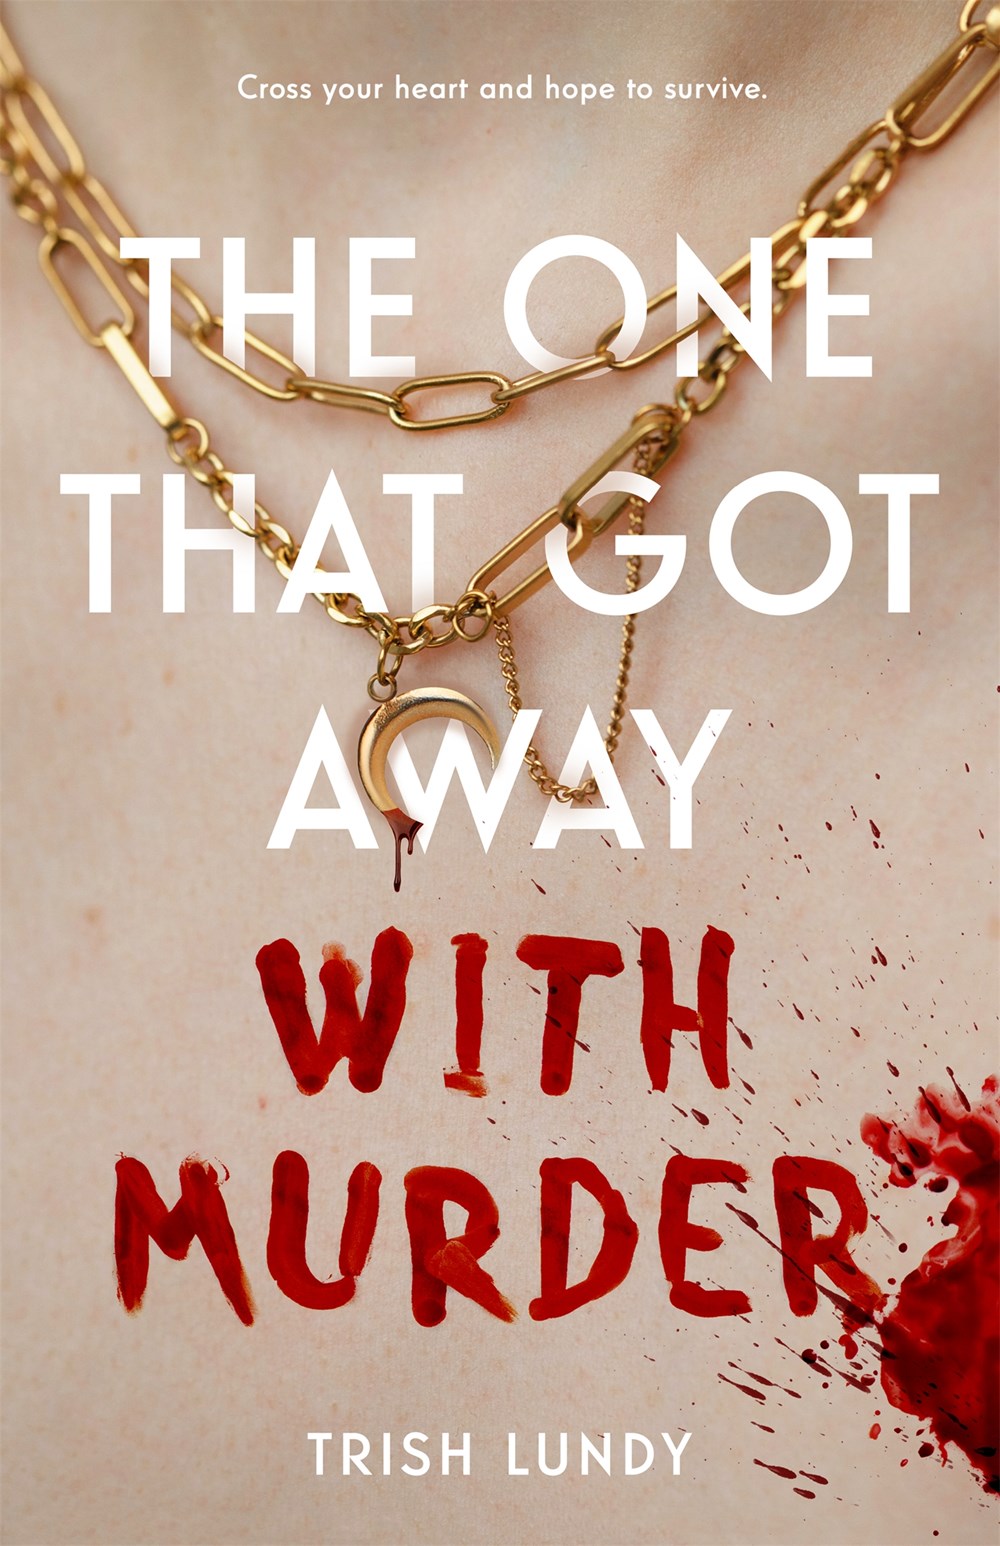 The One That Got Away with Murder - Trish Lundy